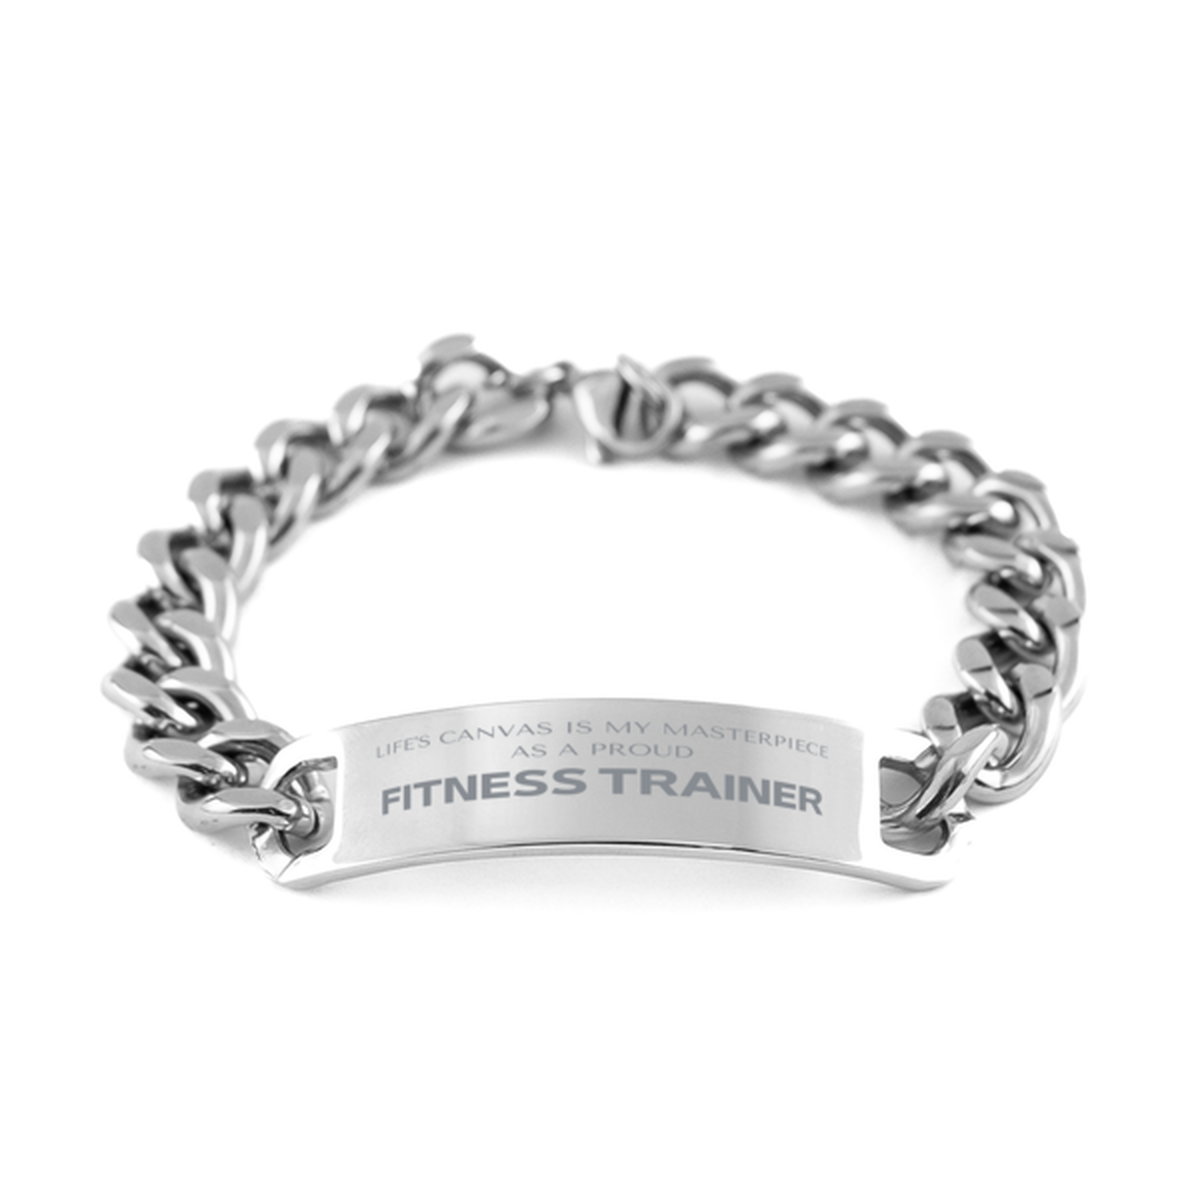 Proud Fitness Trainer Gifts, Life's canvas is my masterpiece, Epic Birthday Christmas Unique Cuban Chain Stainless Steel Bracelet For Fitness Trainer, Coworkers, Men, Women, Friends